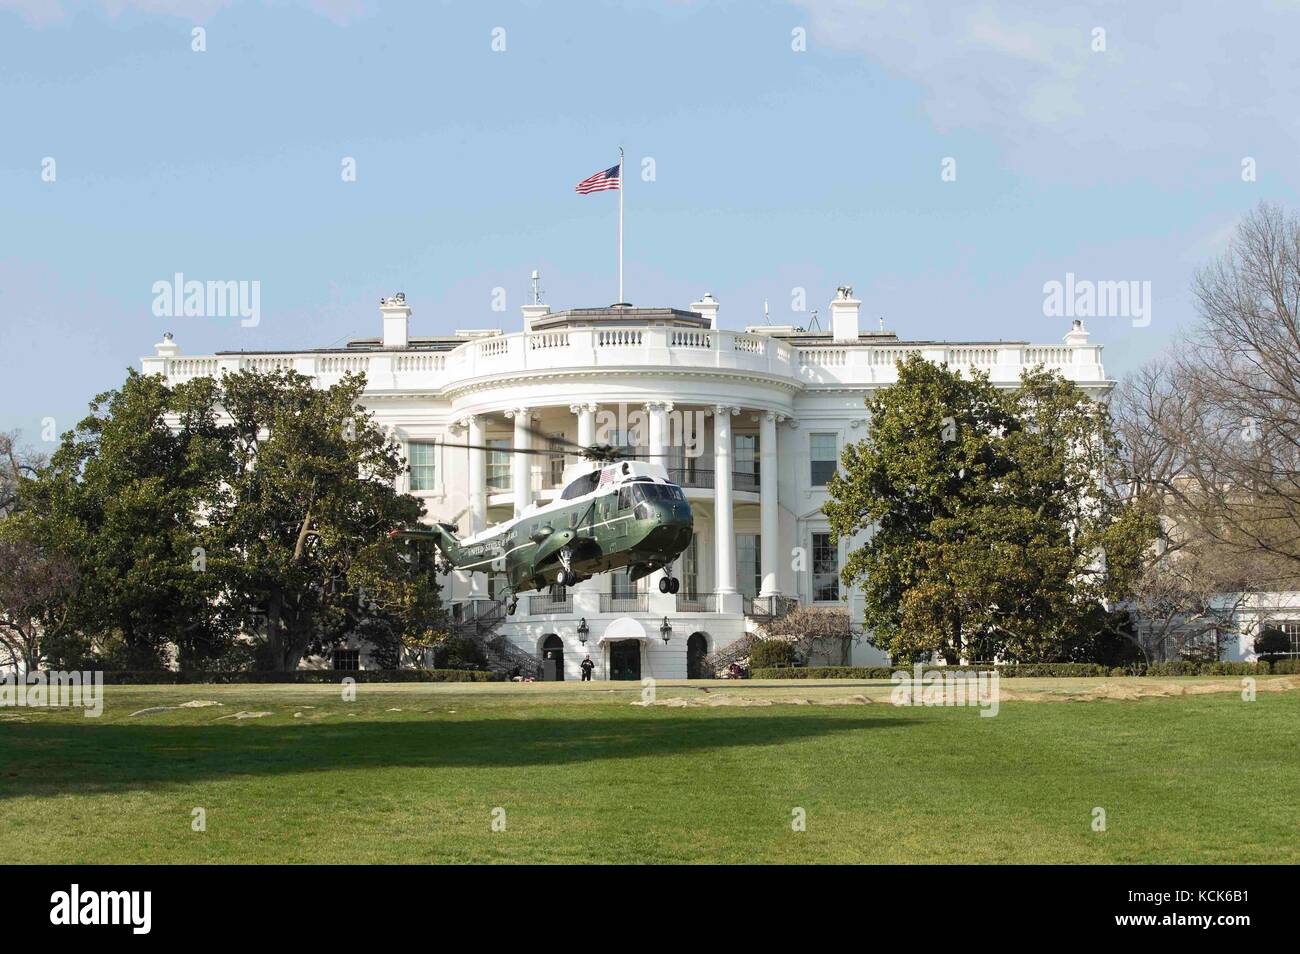 U.S. Marine Corps pilots practice take-offs and landings in the Marine One SH-3 Sea King helicopter on the White House south lawn March 18, 2017 in Washington, DC.  (photo by Micha R. Pierce  via Planetpix) Stock Photo